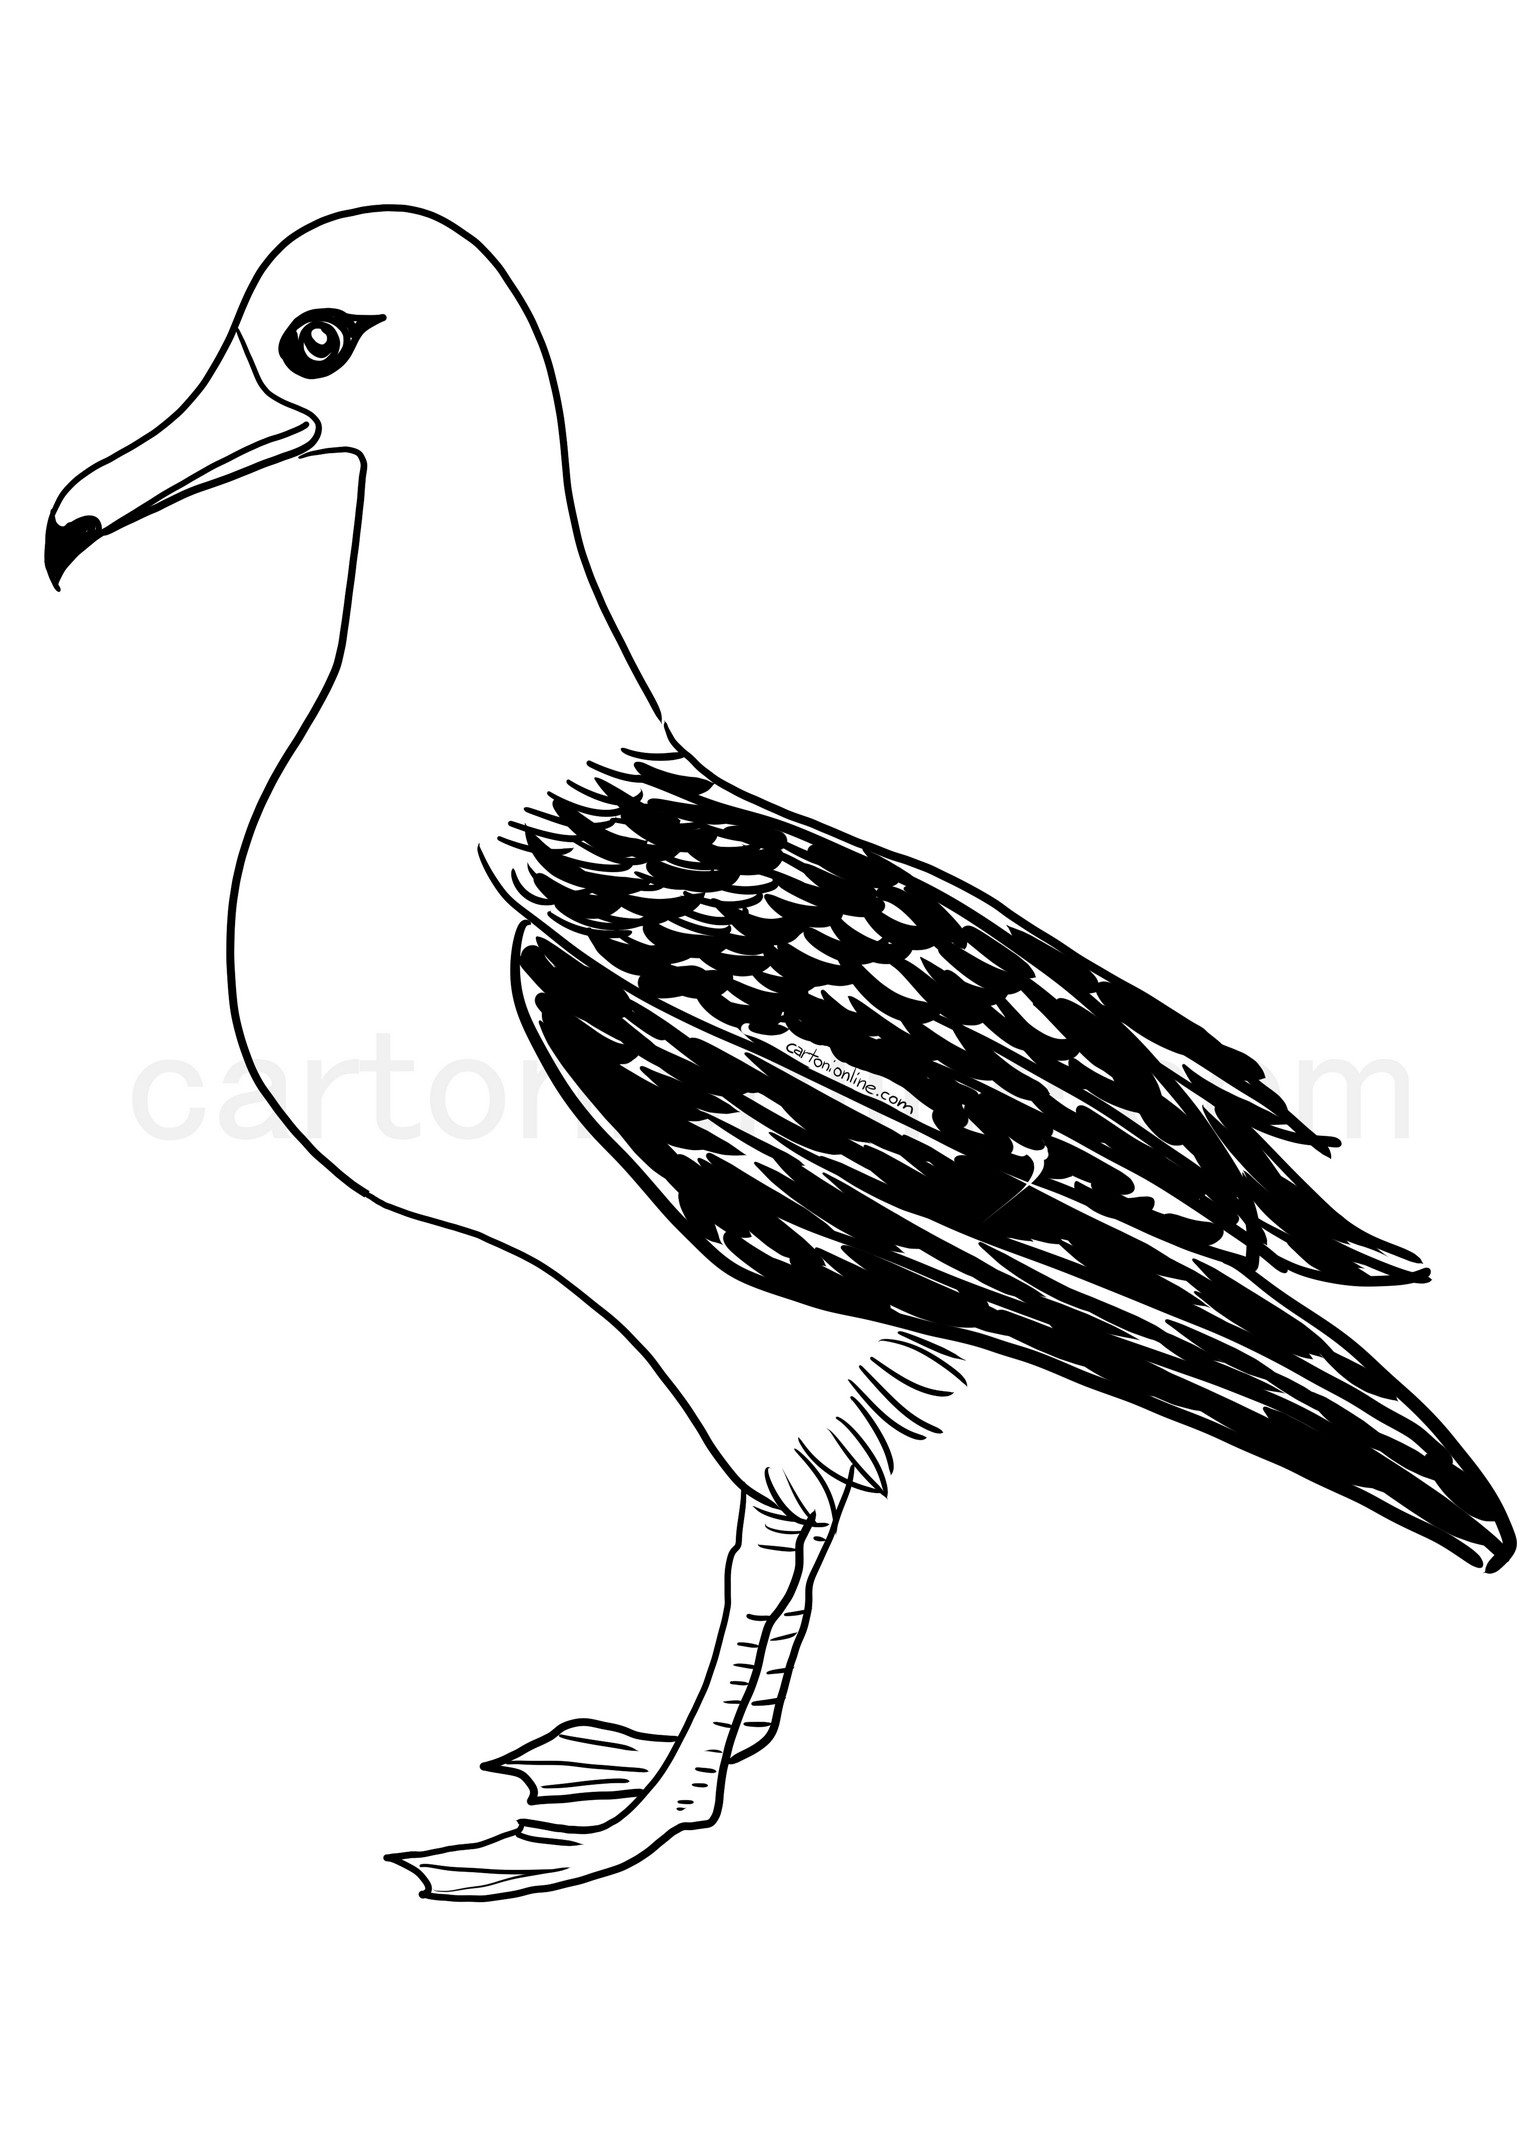 Realistic Albatross coloring page to print and coloring